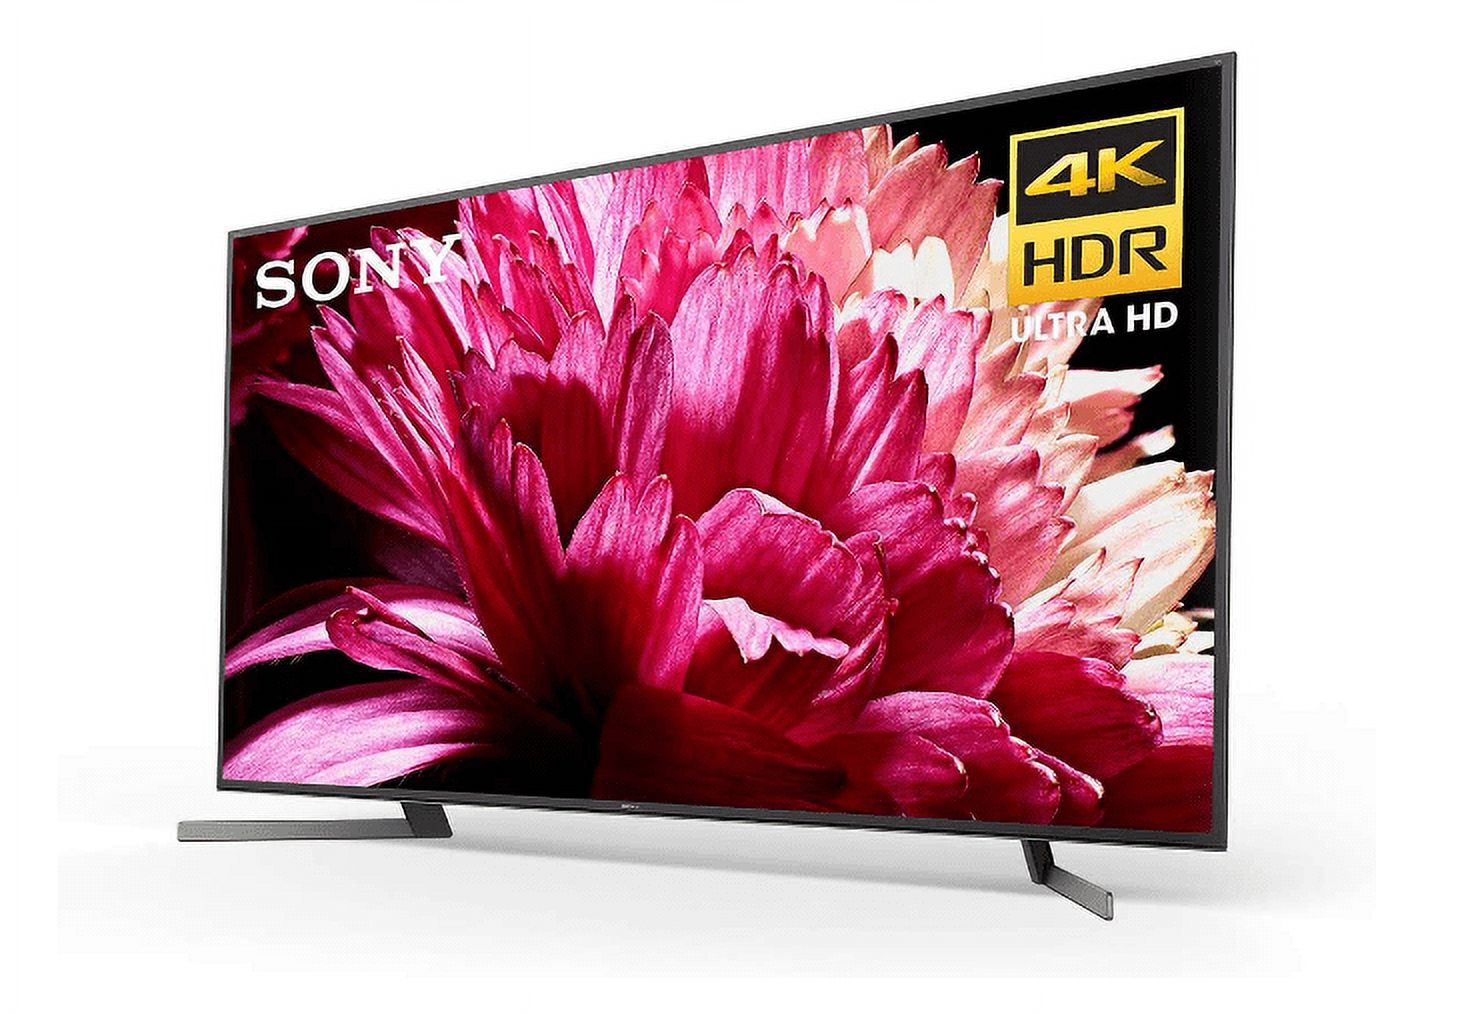 Sony 65" Class 4K UHD LED Android Smart TV HDR BRAVIA 950G Series XBR65X950G - image 3 of 10